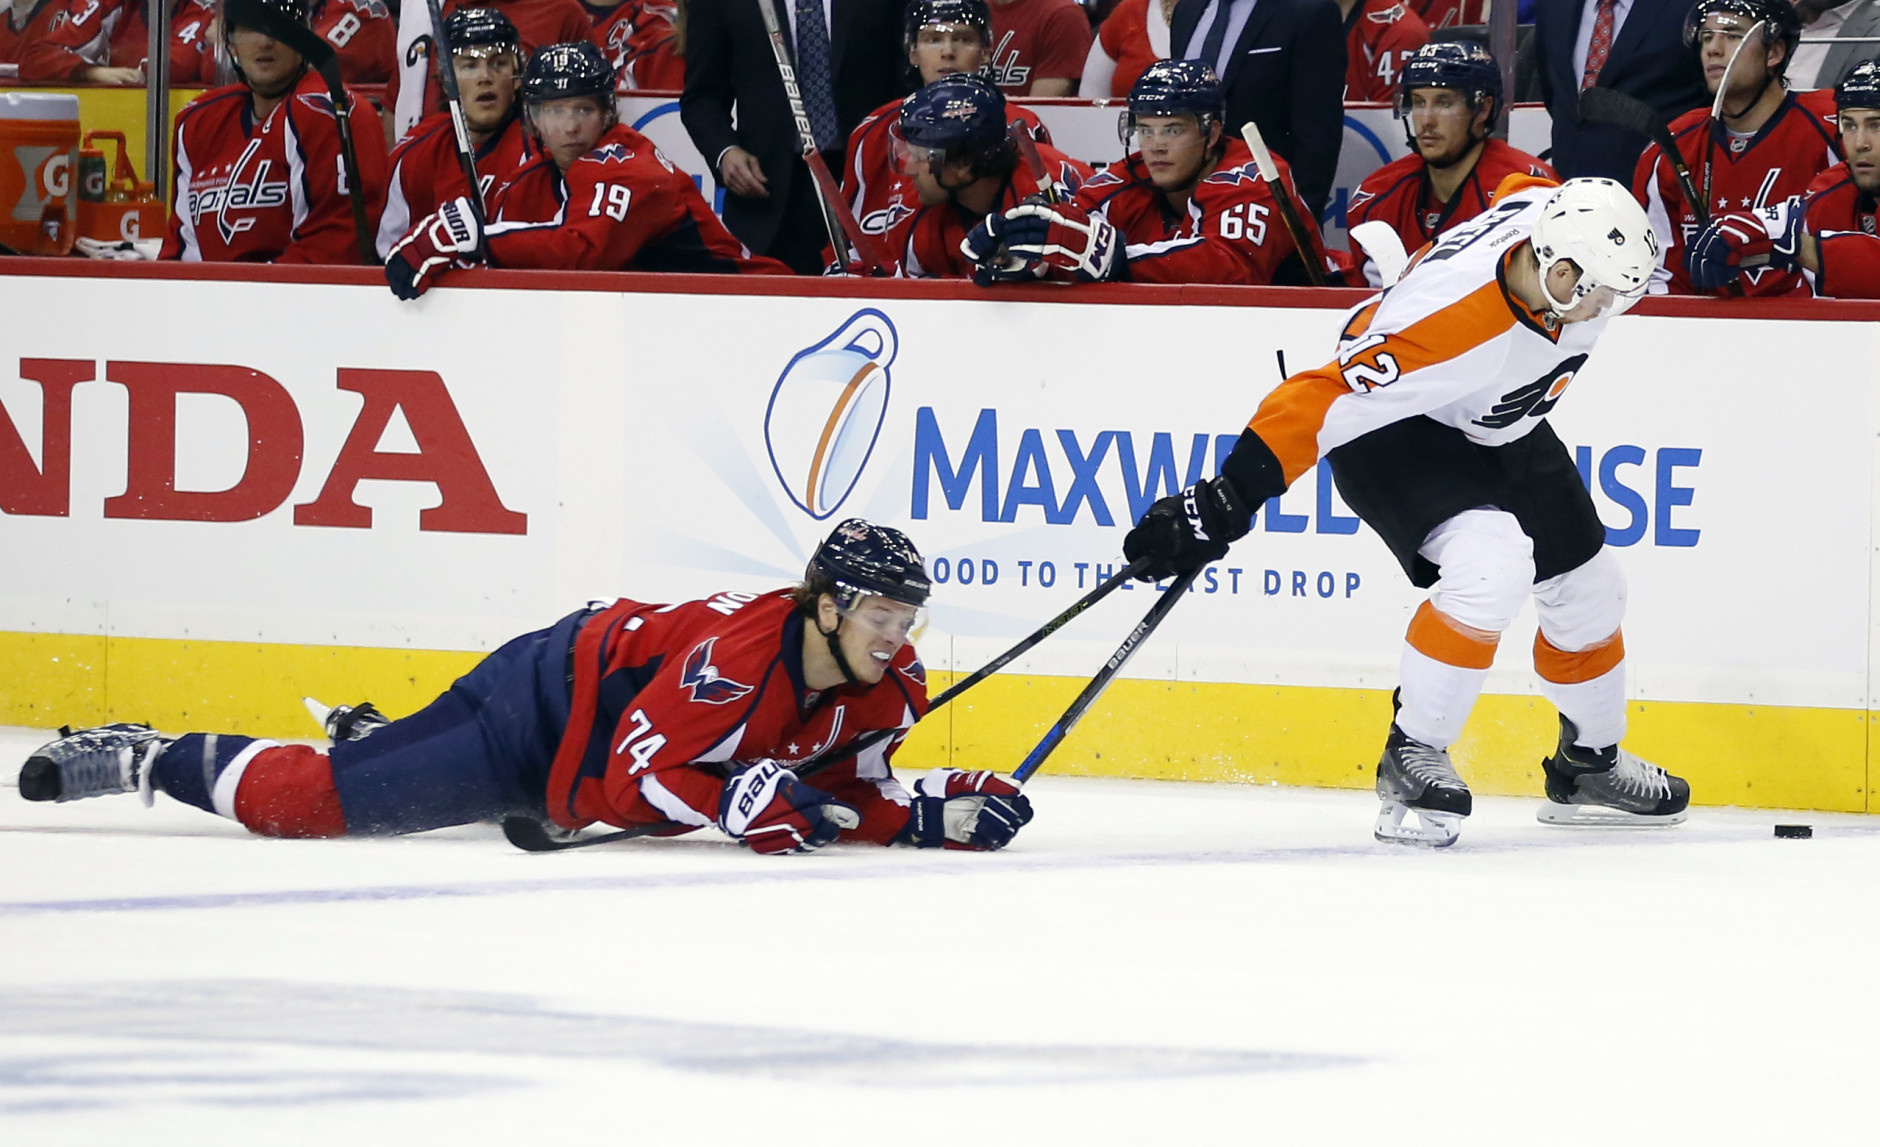 Washington Capitals defenseman John Carlson, left, and Philadelphia Flyers left wing Michael Raffl, from Austria, get tangled up during the first period of Game 1 of a first-round NHL hockey Stanley Cup playoff series Thursday, April 14, 2016, in Washington. (AP Photo/Alex Brandon)